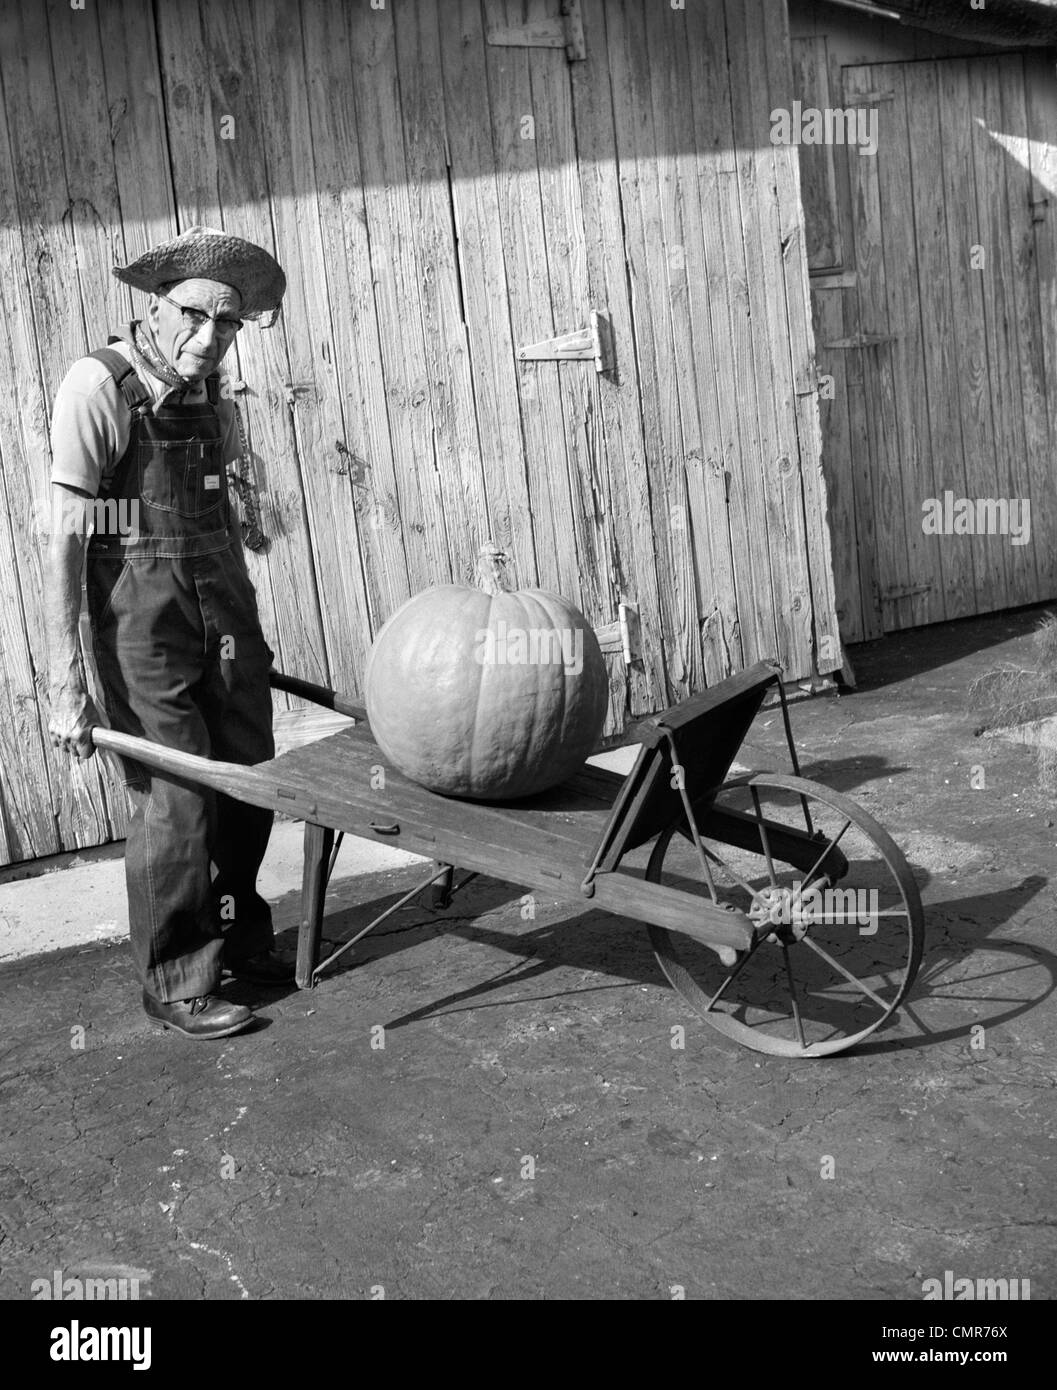 1970s 1980s ELDERLY FARMER IN OVERALLS & STRAW HAT LOOKING AT CAMERA PUSHING OLD WHEELBARROW WITH HUGE PUMPKIN ON IT Stock Photo